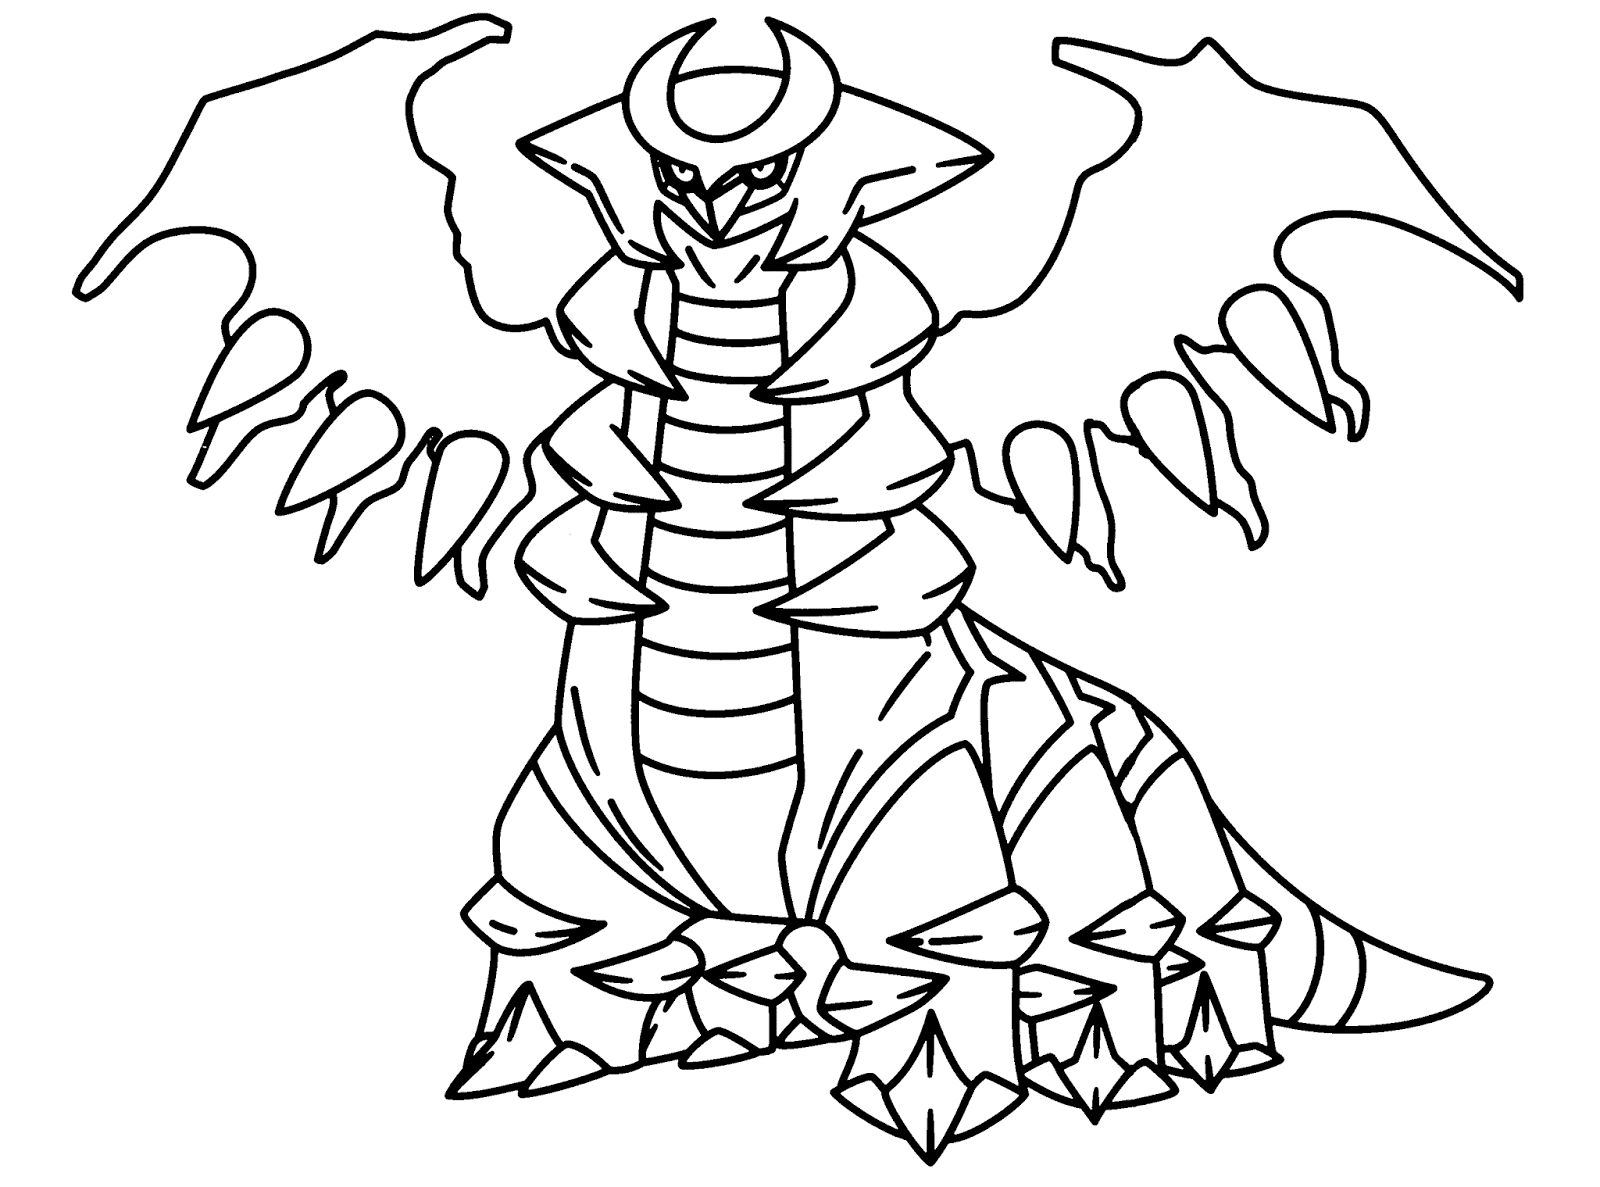 Lugia coloring page